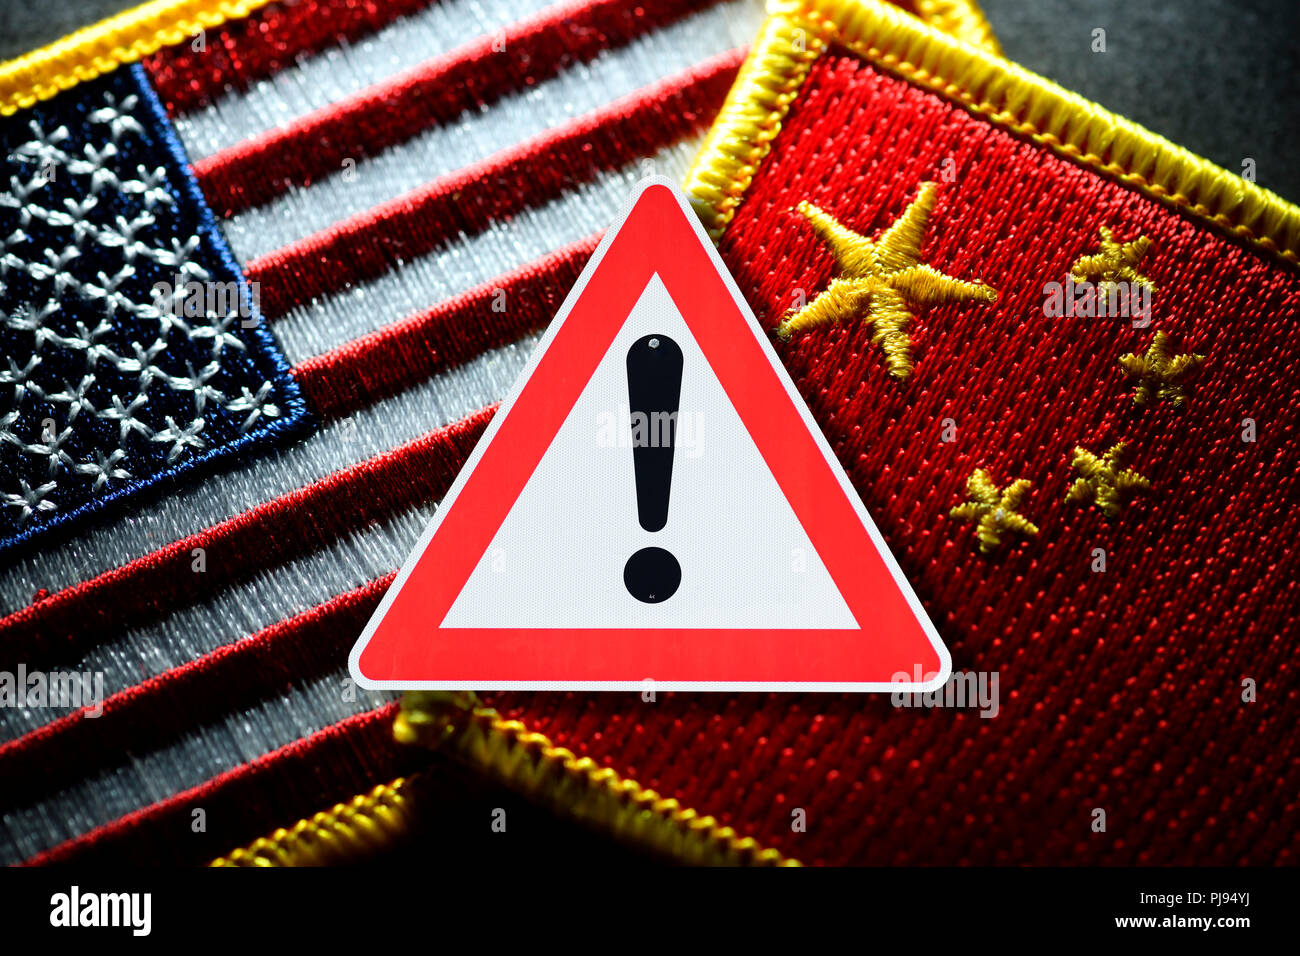 Flags of the USA and China with warning, commercial war, Fahnen von USA und China mit Warnschild, Handelskrieg Stock Photo